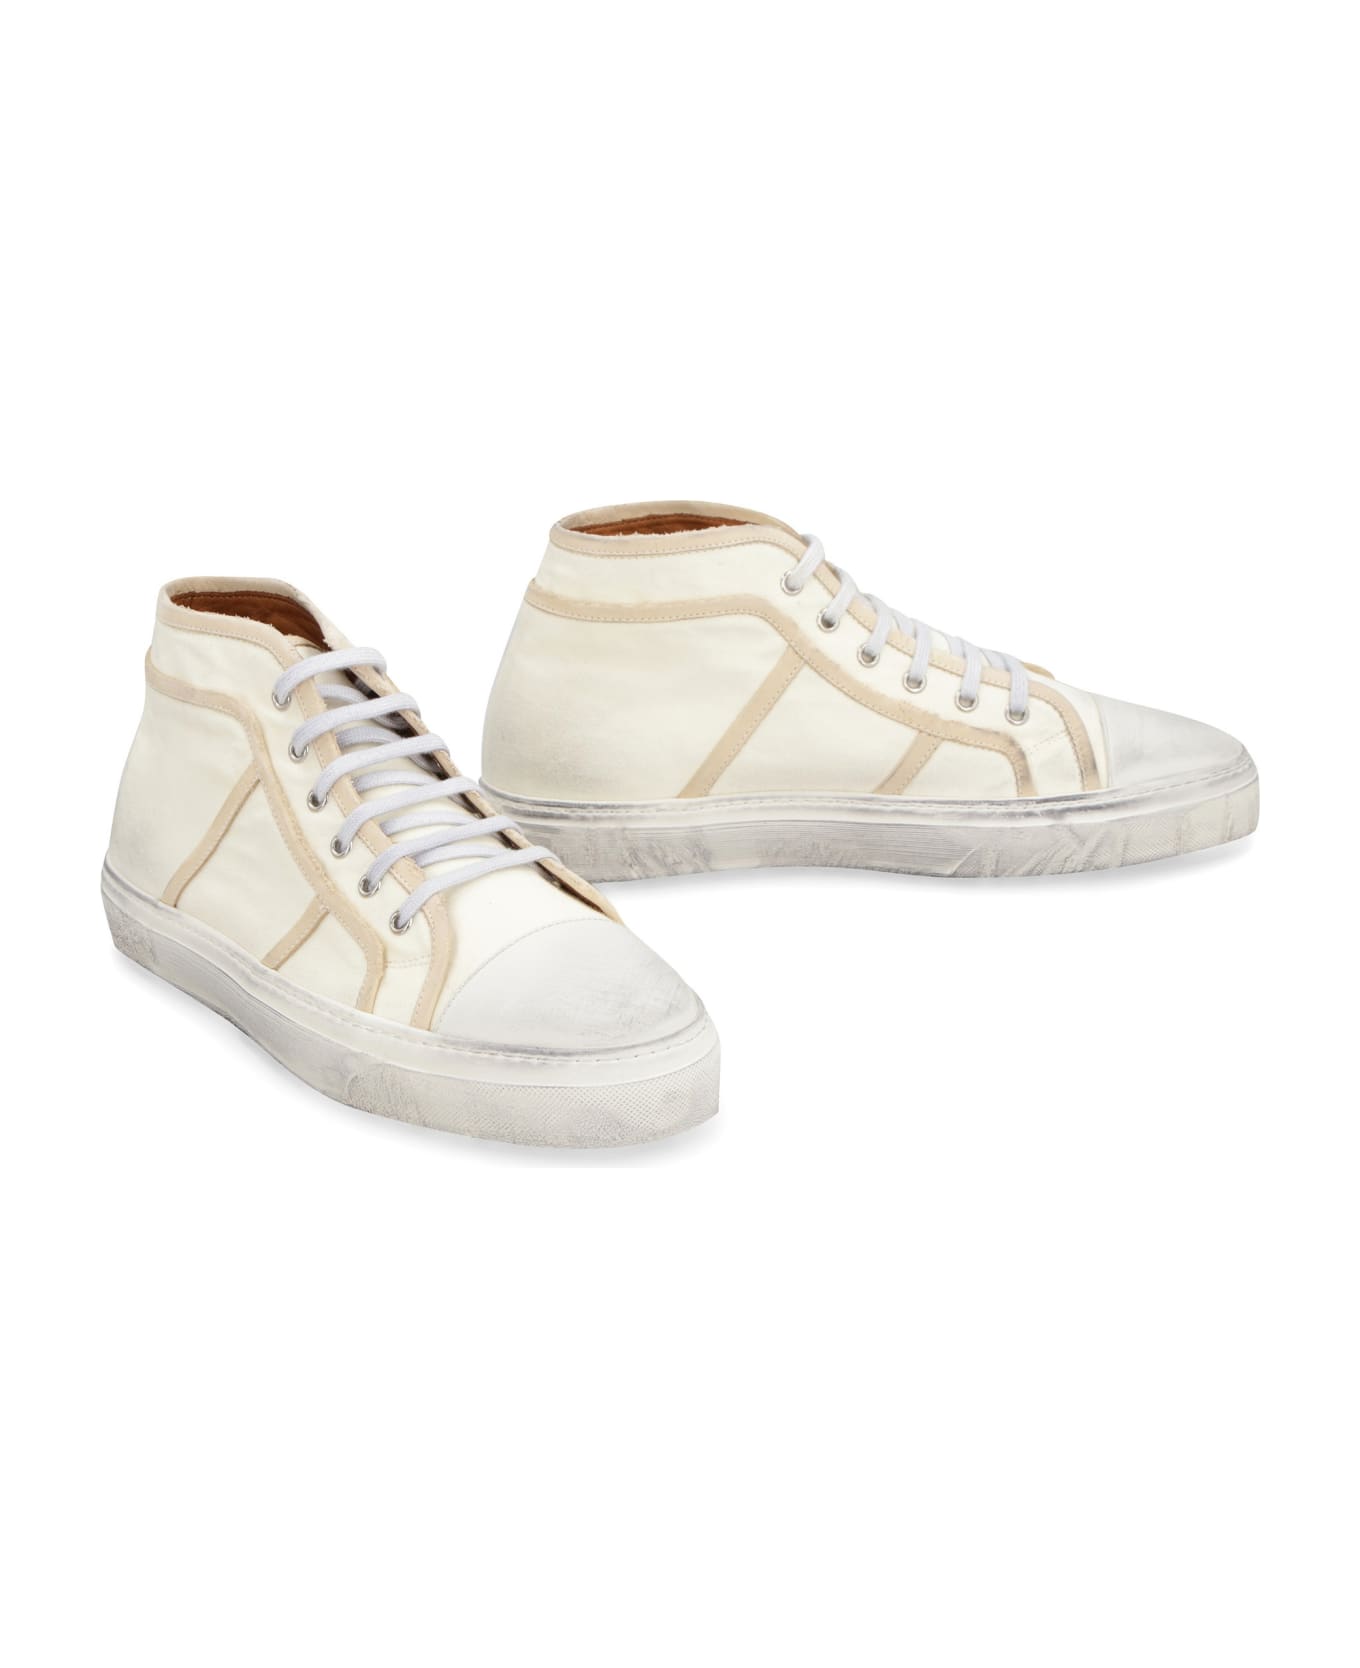 Dolce & Gabbana Canvas Mid-top Sneakers - Ivory スニーカー